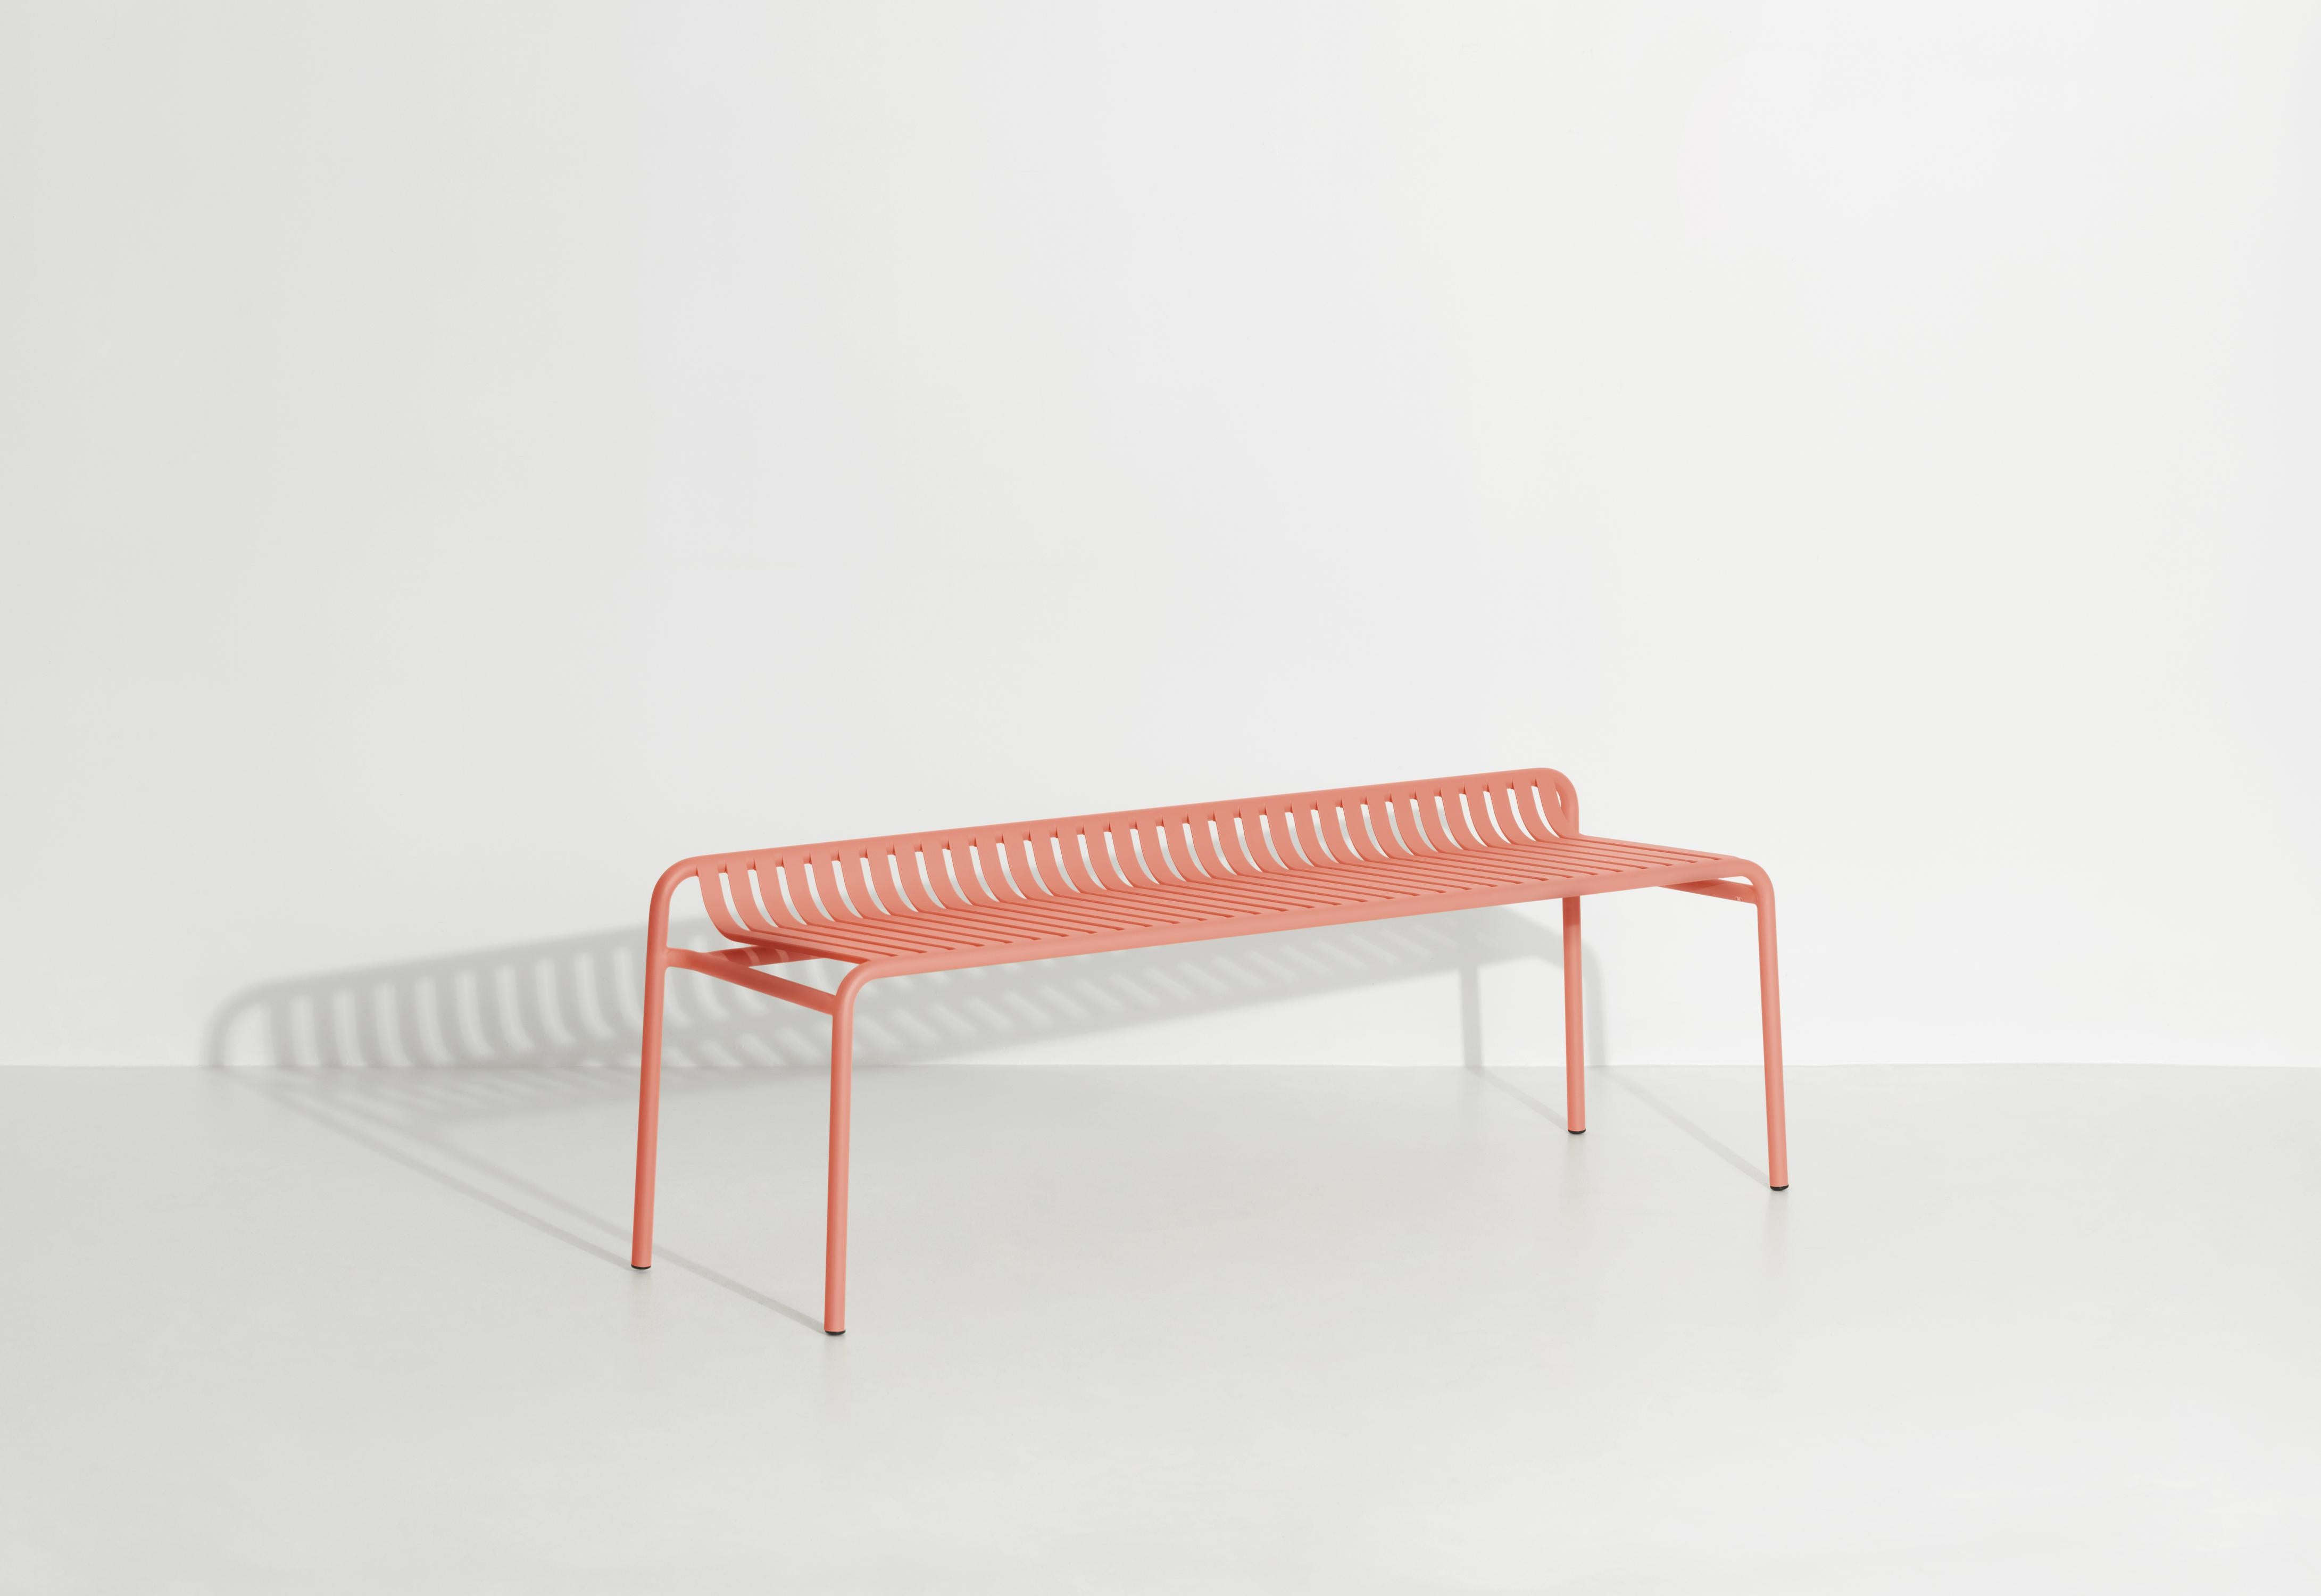 Petite Friture Week-End Bench without Back in Coral Aluminium by Studio BrichetZiegler, 2017

The week-end collection is a full range of outdoor furniture, in aluminium grained epoxy paint, matt finish, that includes 18 functions and 8 colours for